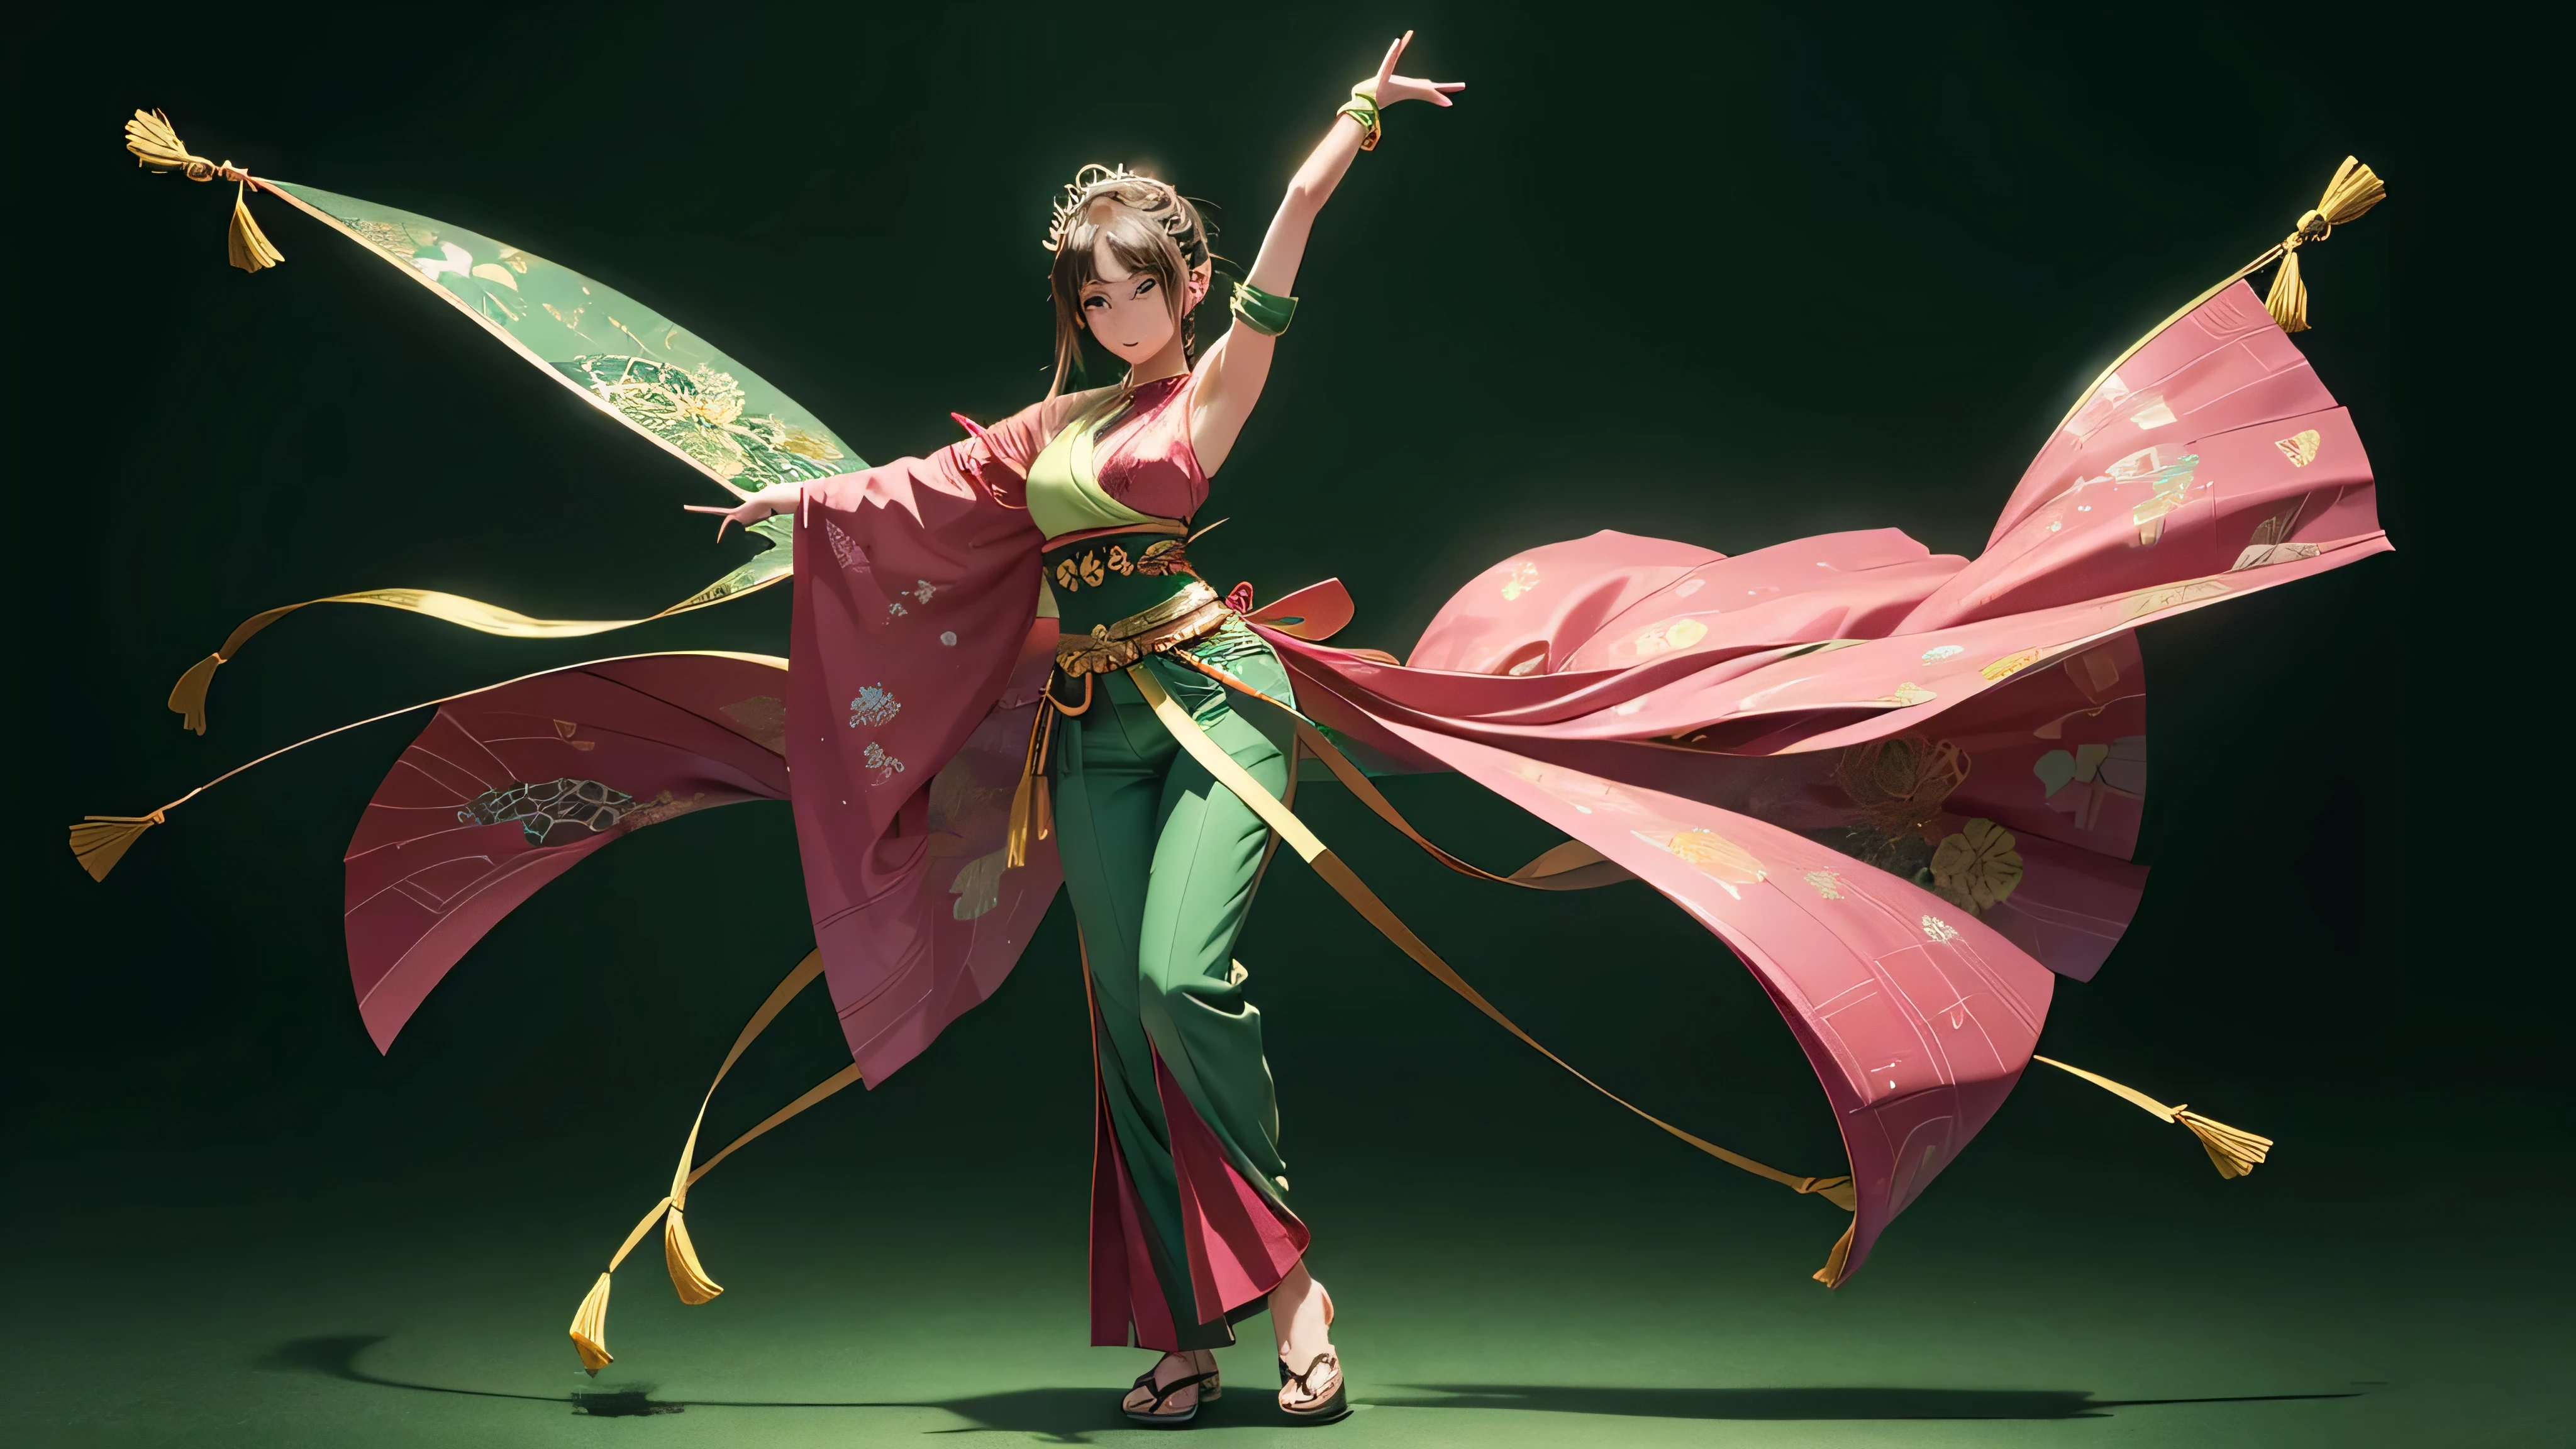 Female dancer, alone, Japanese anime style animation, full body, pants look, green background, face facing front, T-pose